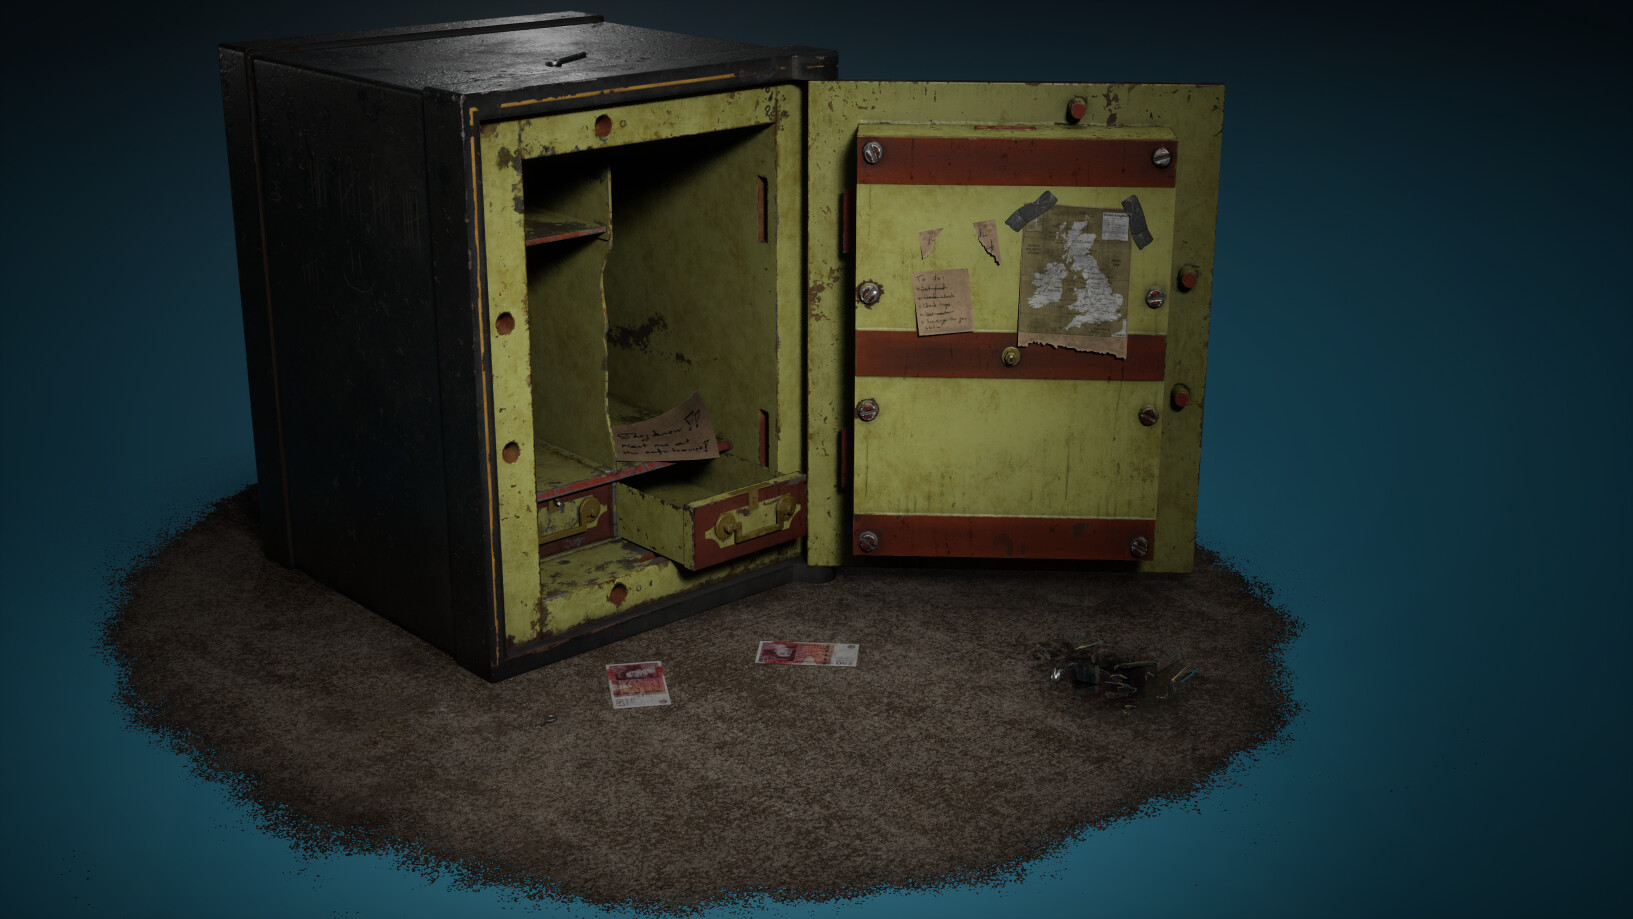 1890s safe 3D prop with storytelling components.